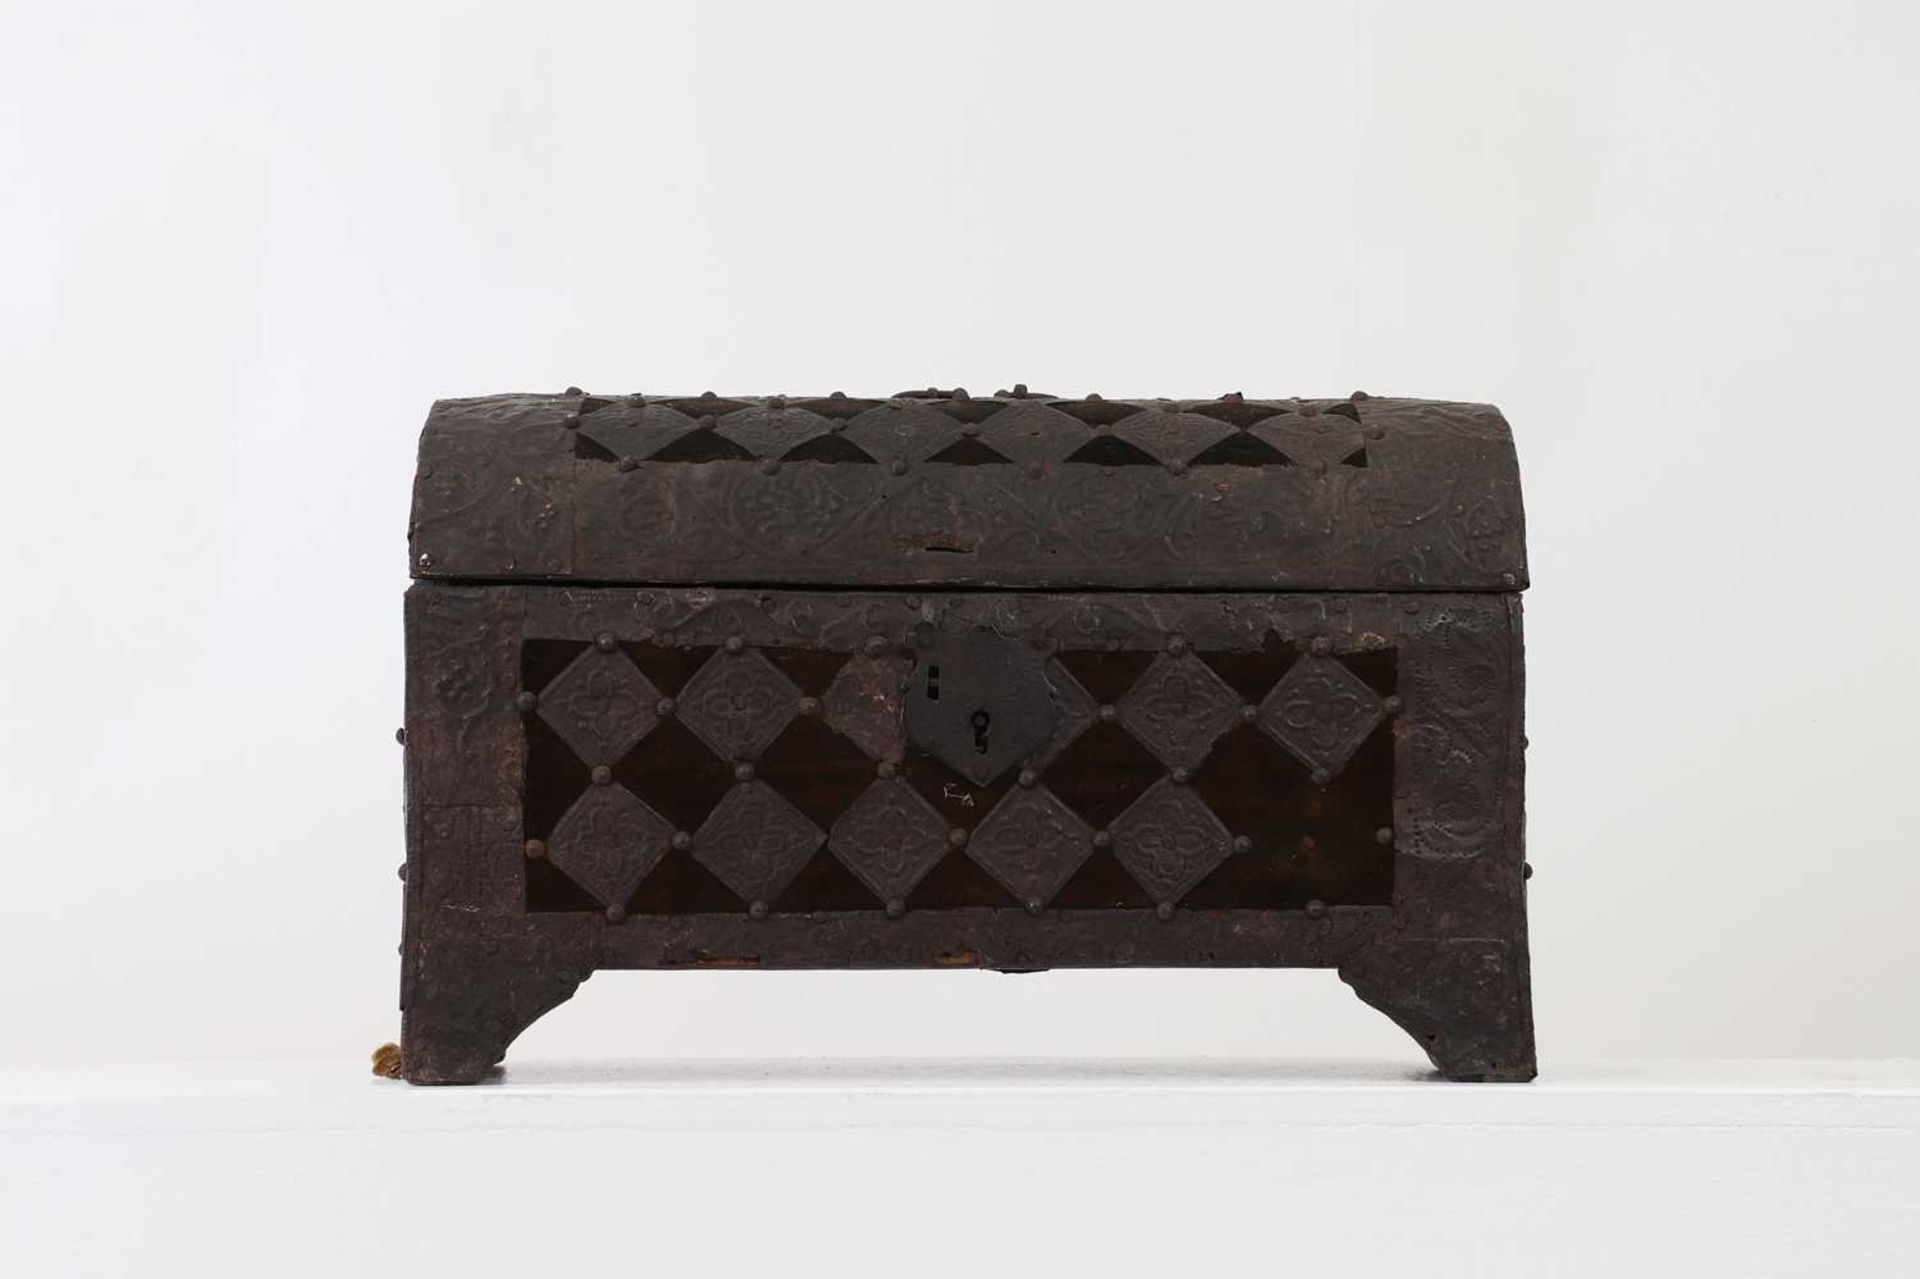 A studded metal-clad table casket, - Image 2 of 7